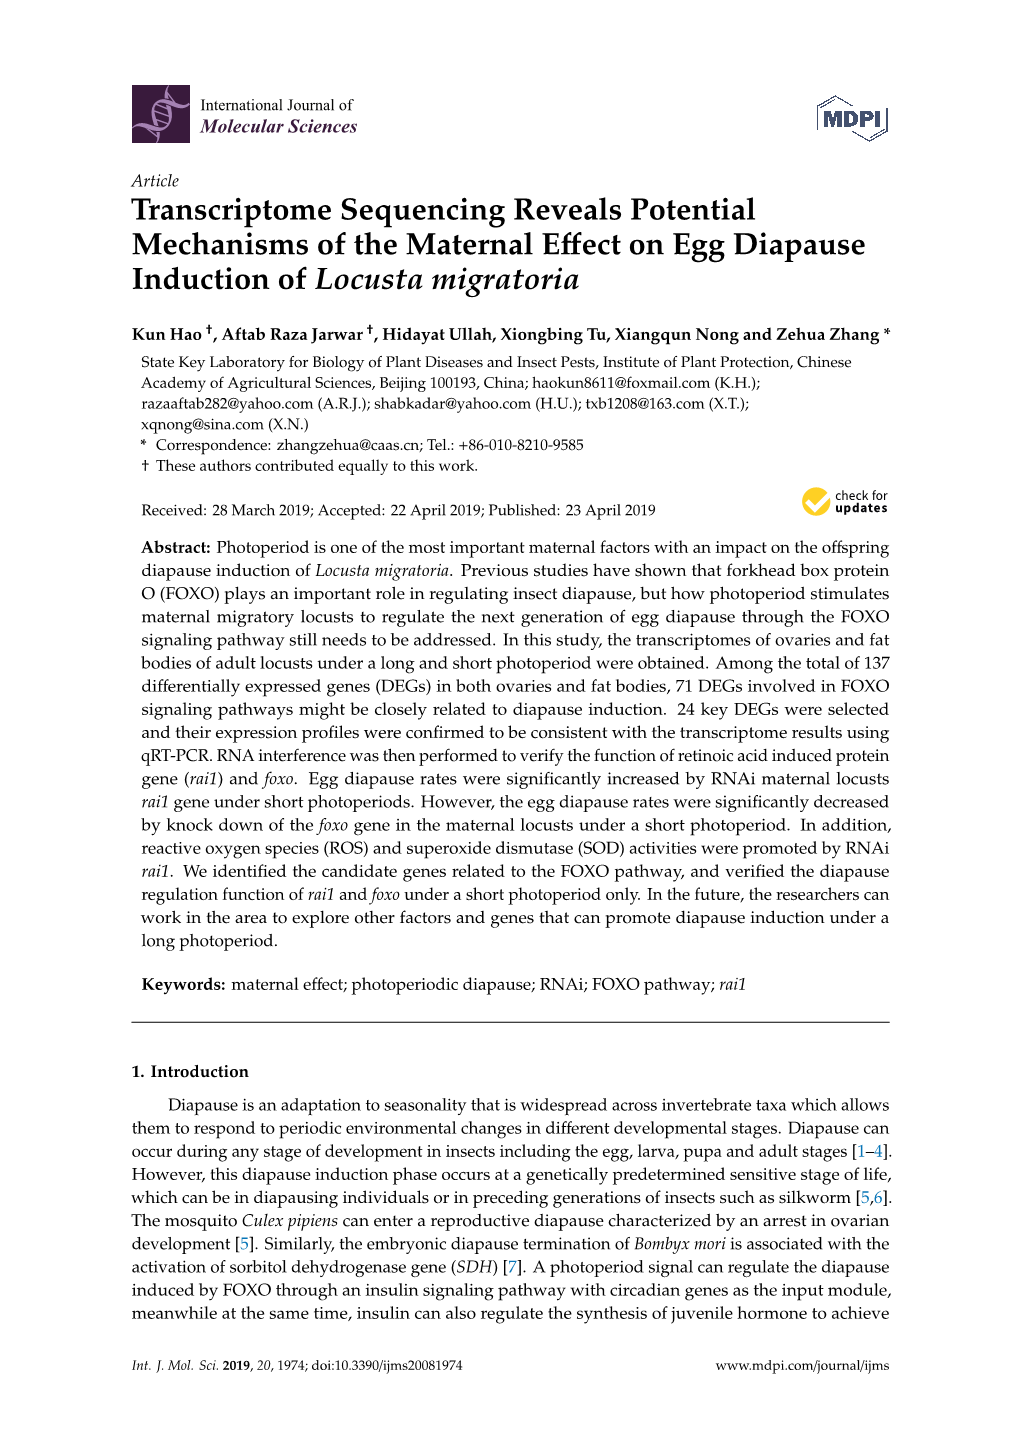 Transcriptome Sequencing Reveals Potential Mechanisms of the Maternal Eﬀect on Egg Diapause Induction of Locusta Migratoria